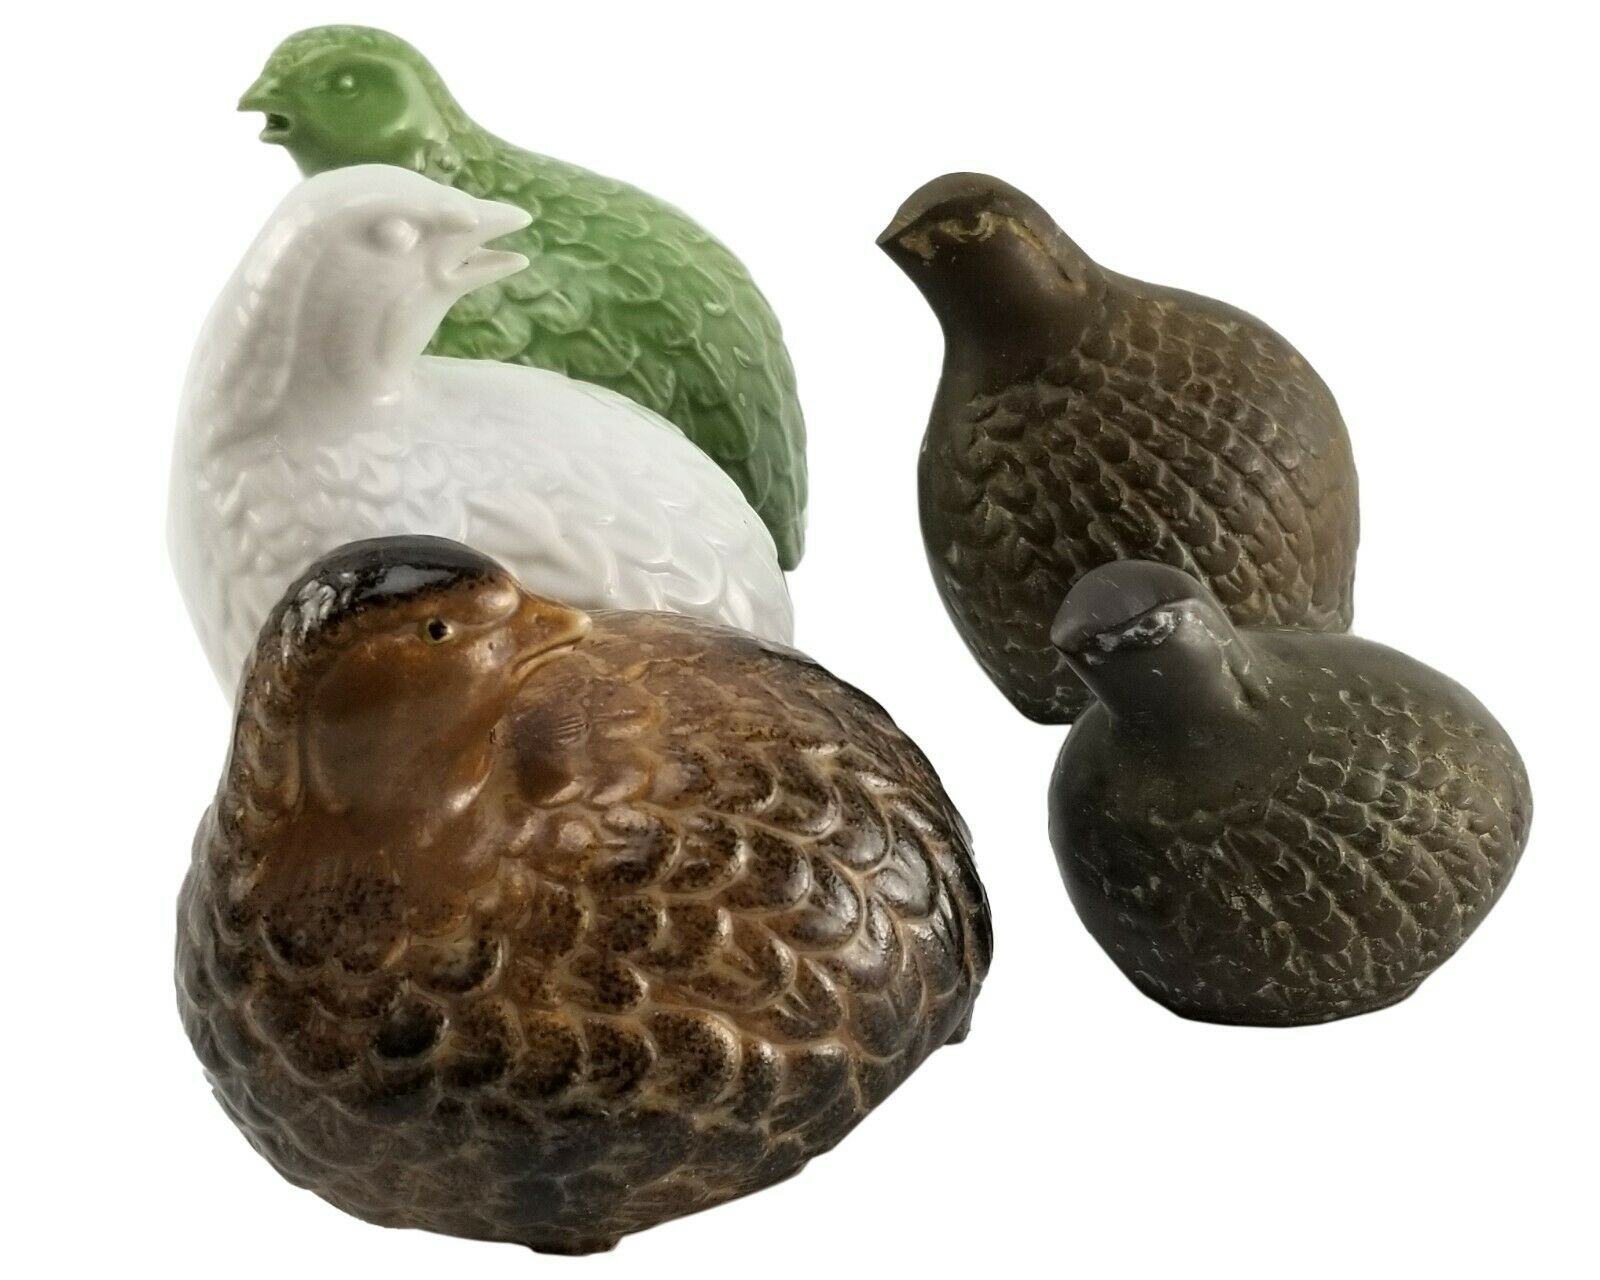 Vintage Quail Figurines Ceramic And Brass Collection (5) Gumps Sf